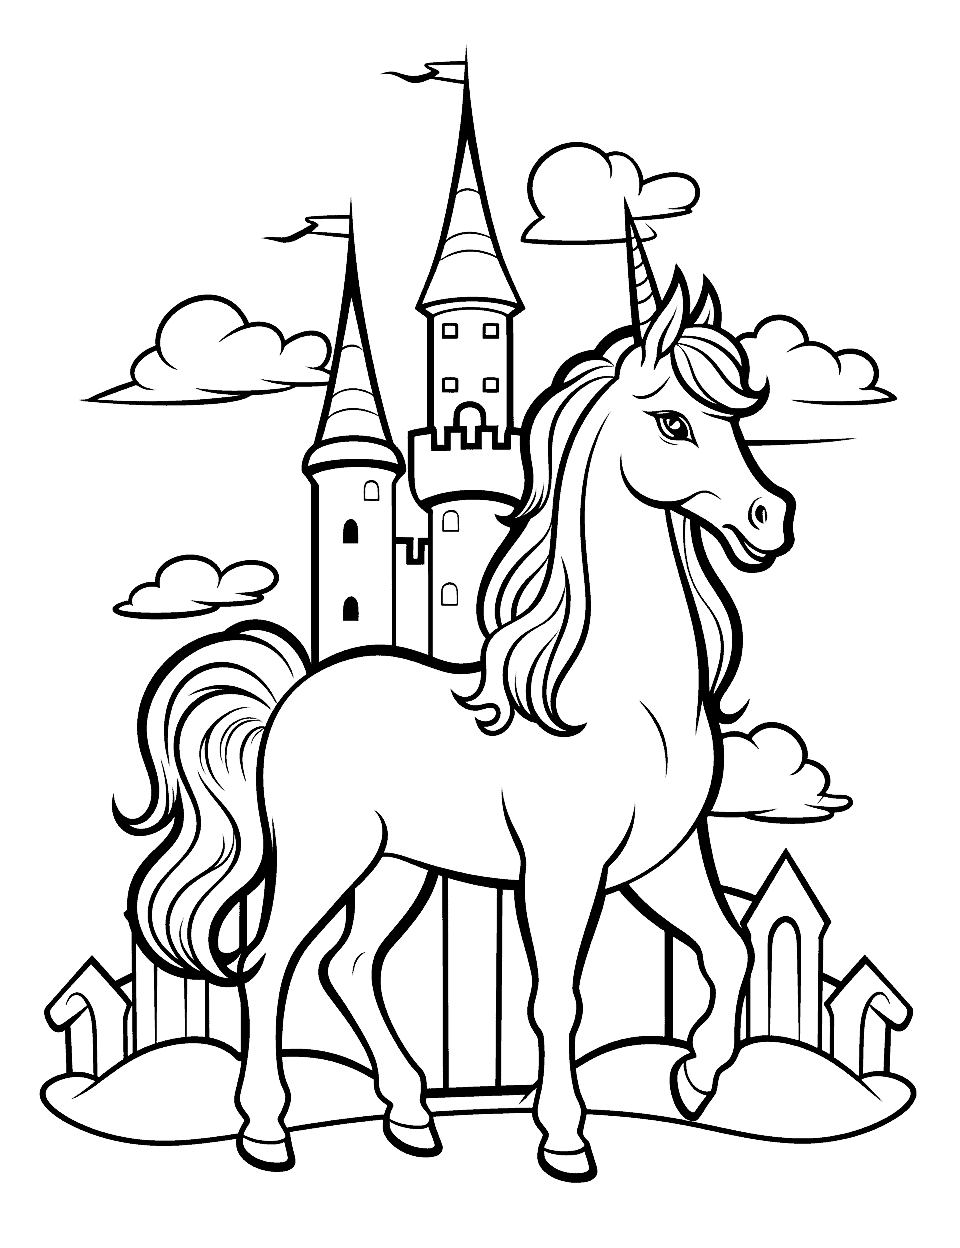 Unicorn and Rainbow Castle Coloring Page - A unicorn in front of a rainbow-colored castle full of colorful towers.